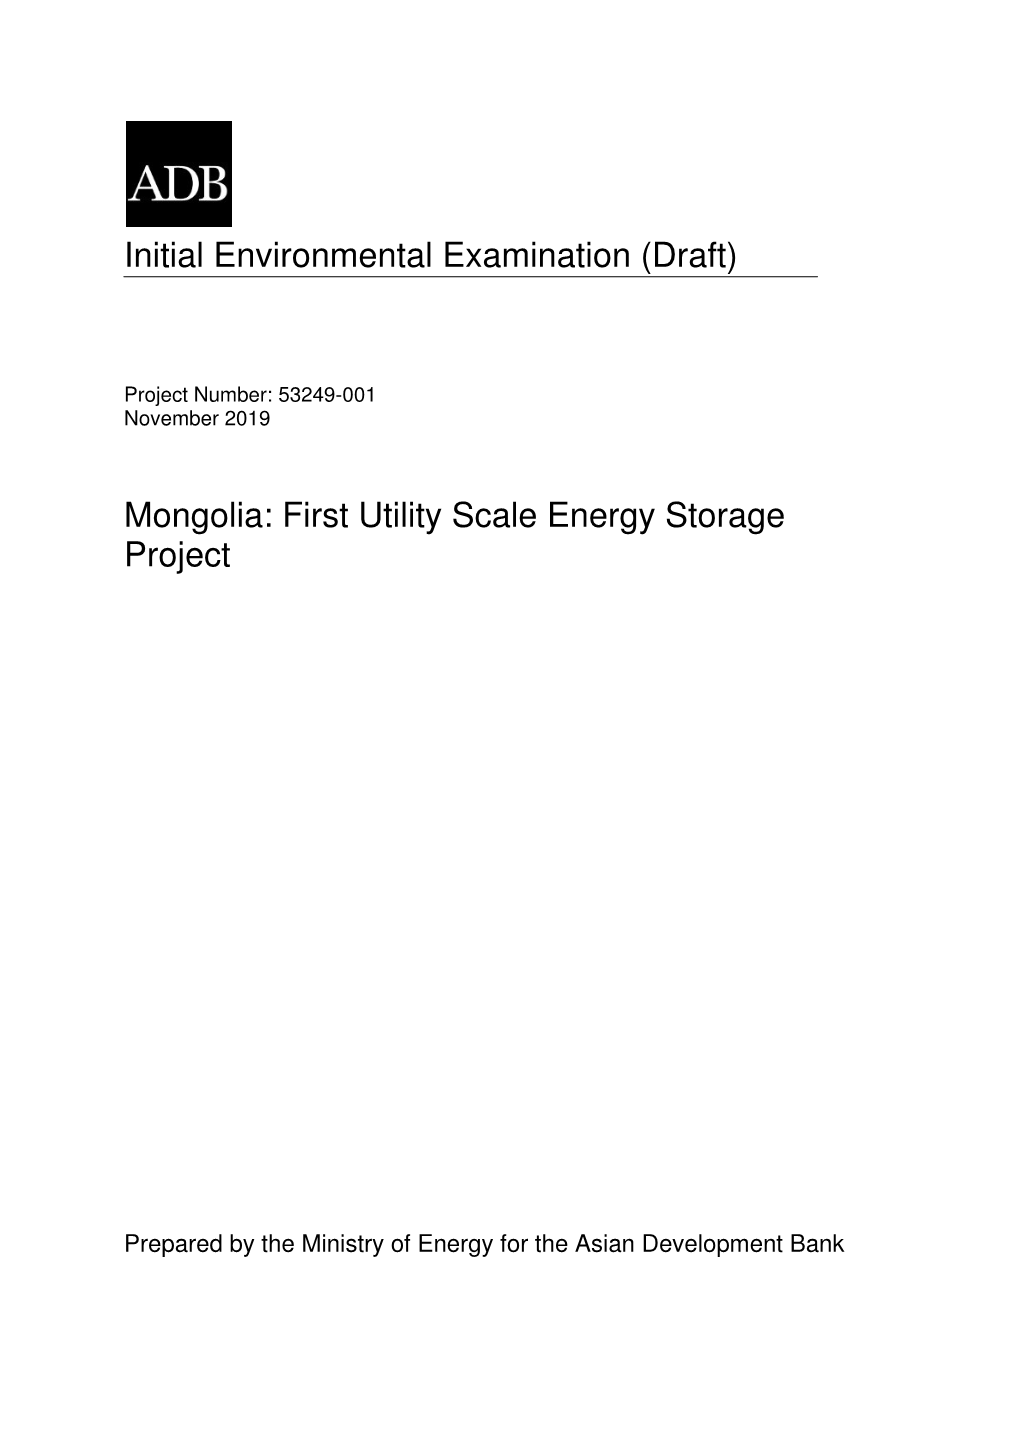 53249-001: First Utility-Scale Energy Storage Project